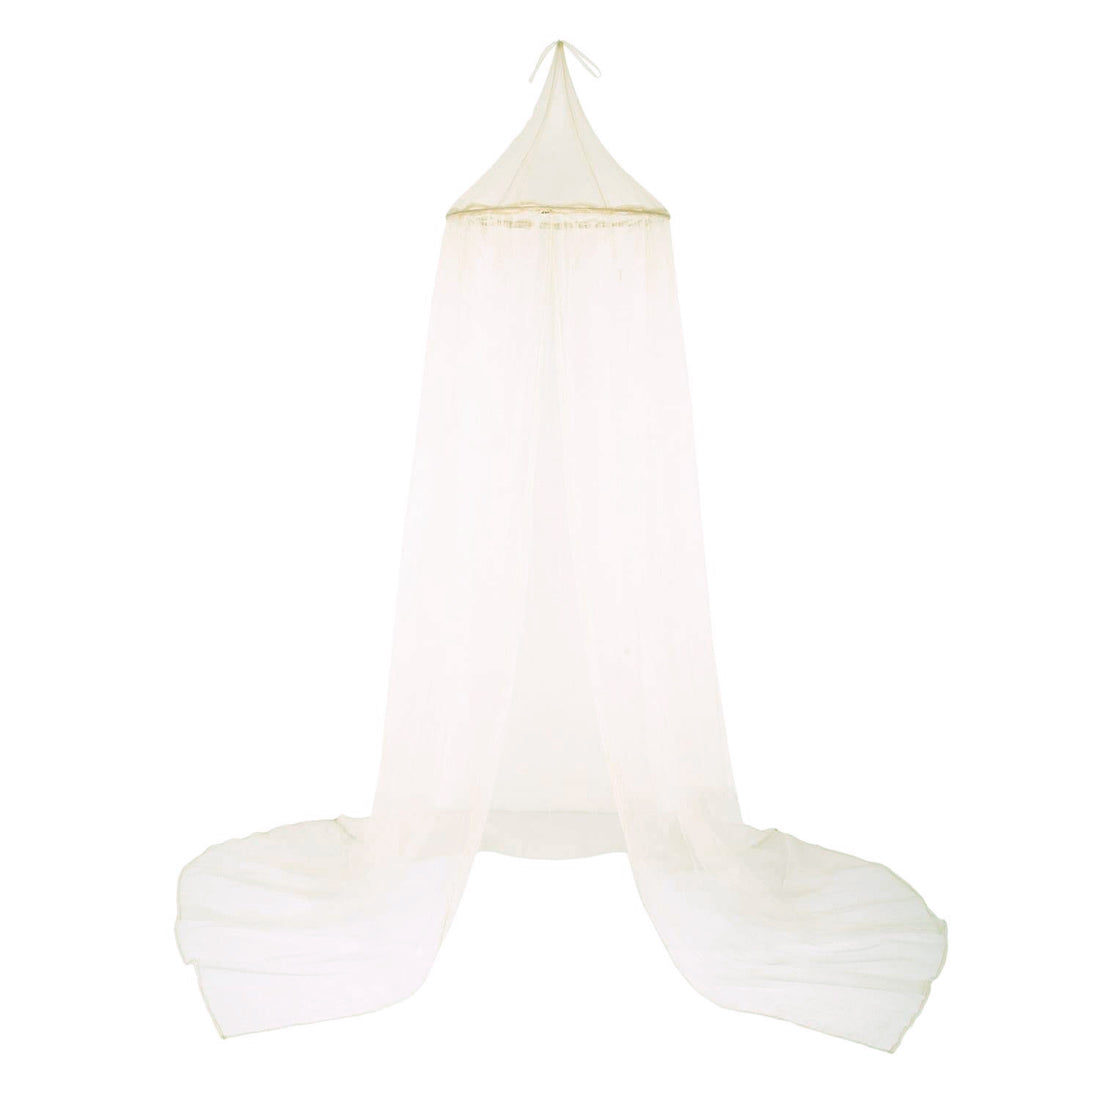 Numero 74 Sparkling Tulle Canopy - Gold